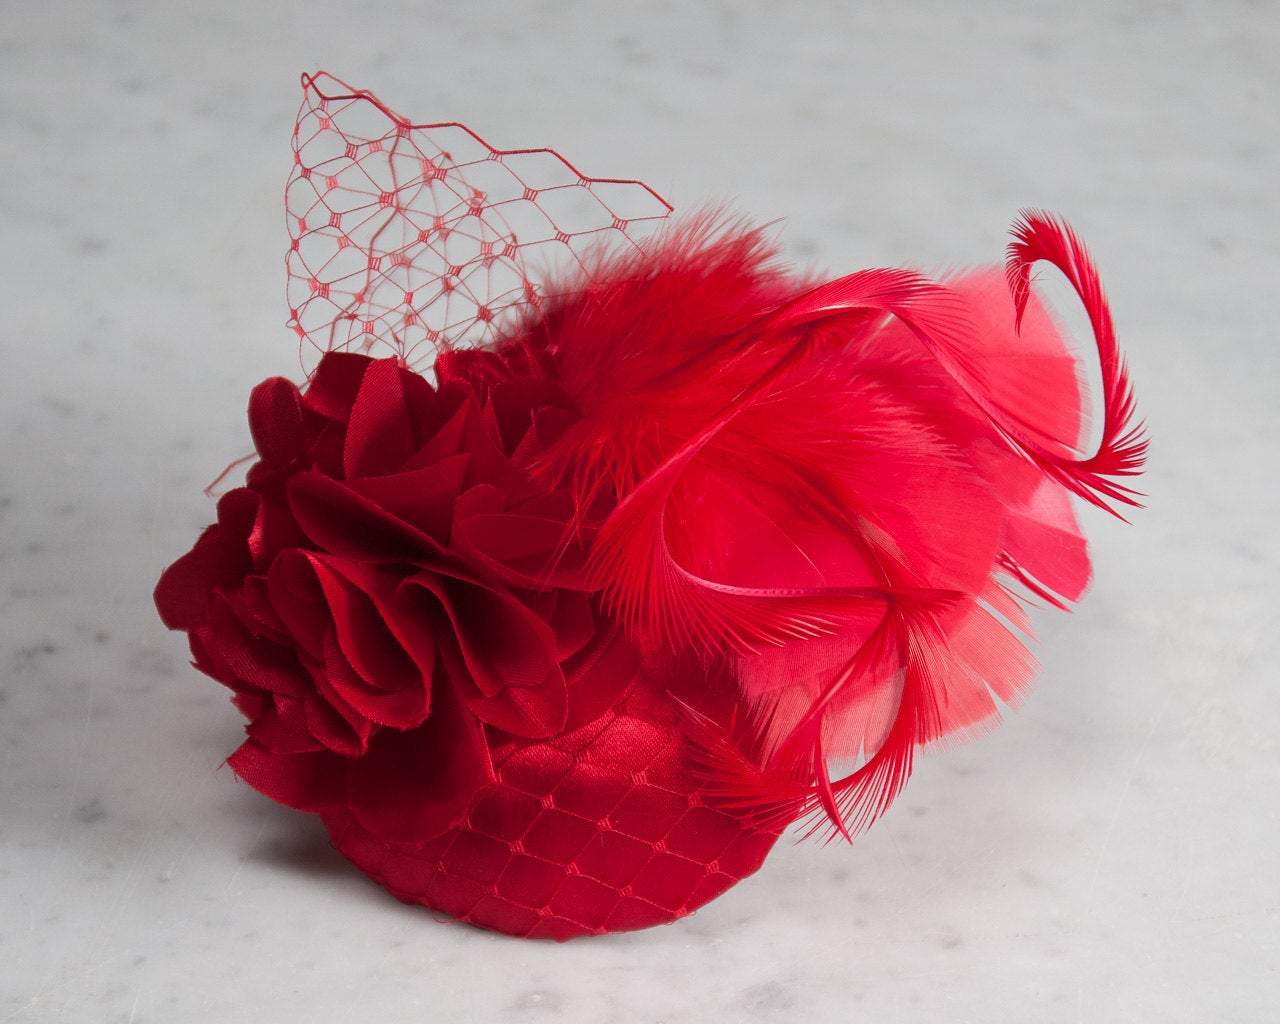 FASCINATOR - HEADDRESS WITH VEIL DETAILS, FEATHERS IN RED BE MY VALENTINE © Seegang Berlin